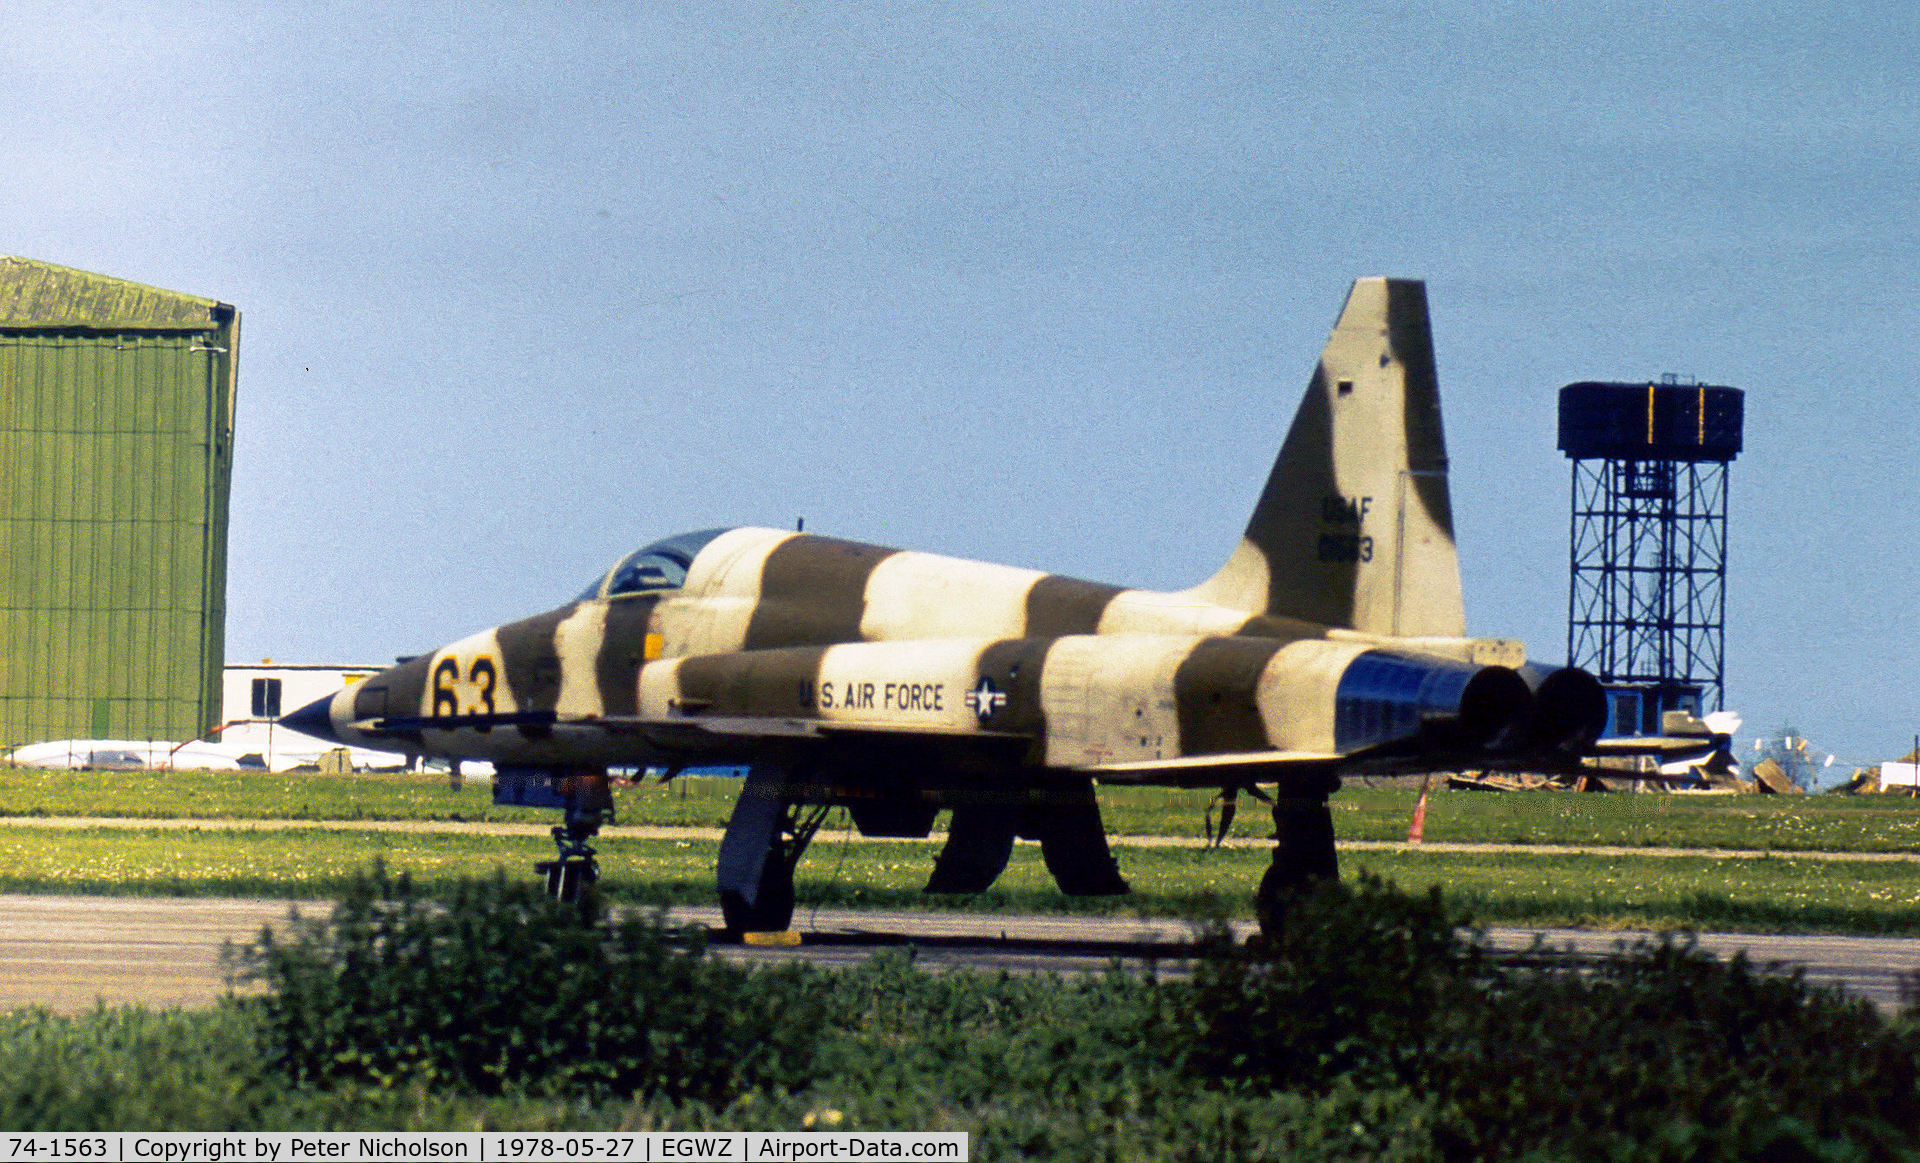 74-1563, 1974 Northrop F-5E Tiger II C/N R.1245, F-5E Tiger II of the 527th Tactical Fighter Training Aggressor Squadron at RAF Alcobury in May 1978.